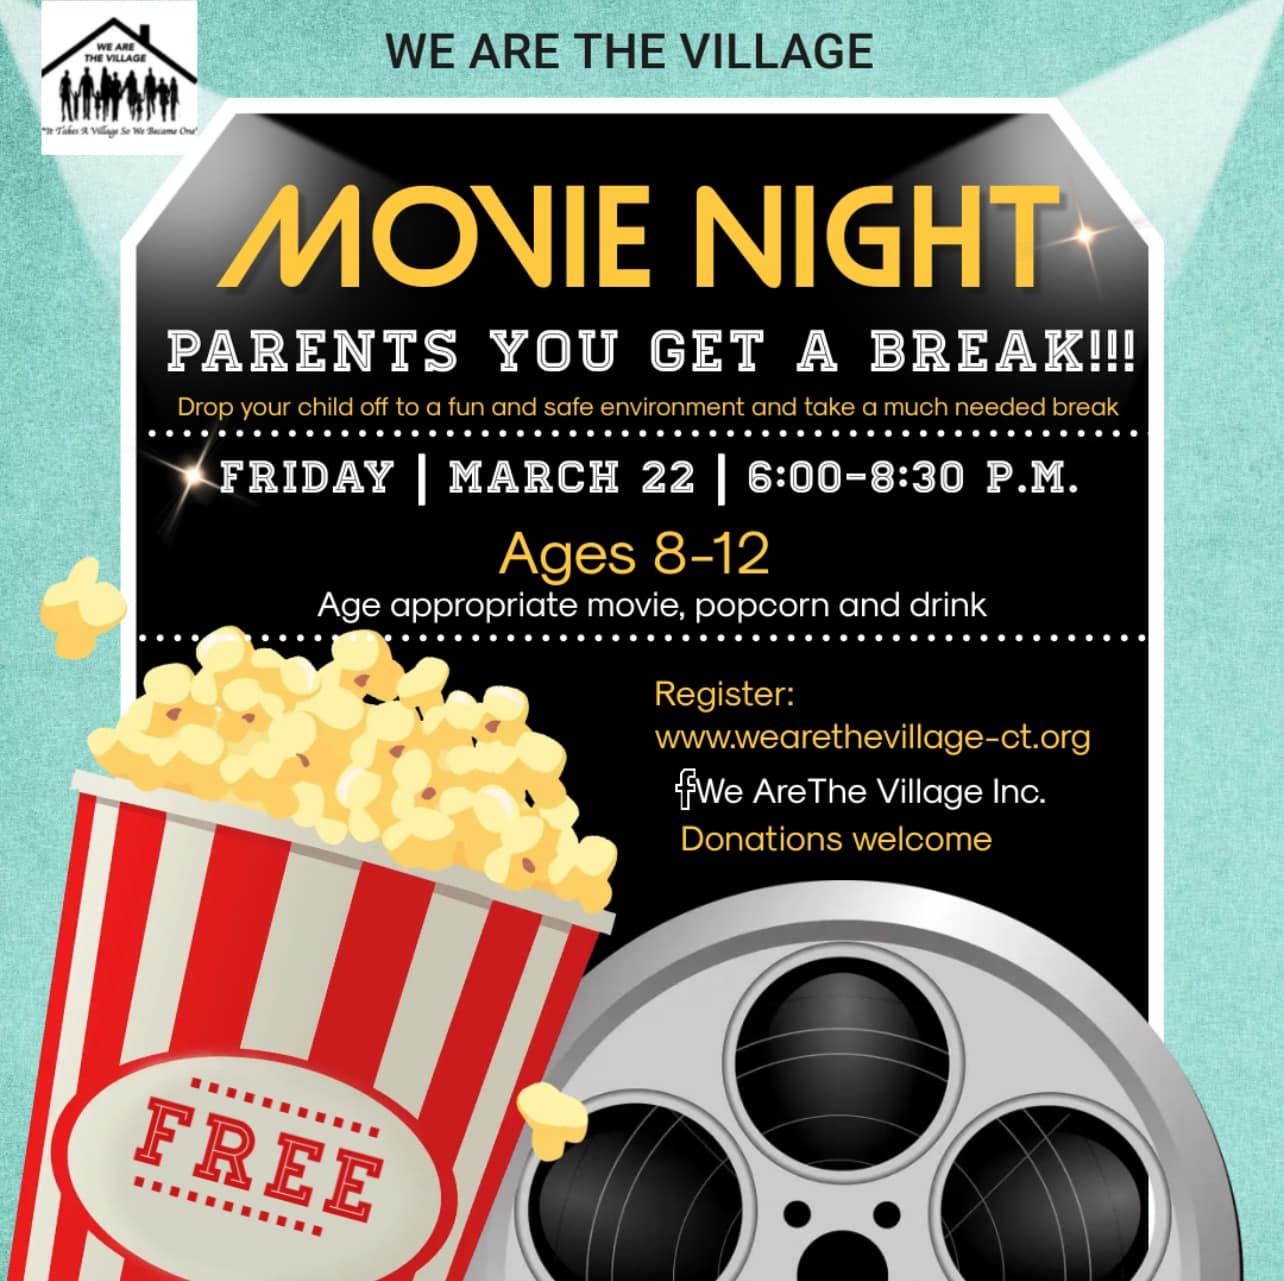 May be an image of text that says 'l WE ARE THE VILLAGE MONIE NIGHT PARENTS YOU GET A BREAK!!! FRIDAY MARCH 22 6:00-8:30 P.M. Ages 8-12 Age appropriate movie, popcorn and drink Register: www.wearethevillage-ct.org fwe AreThe Village Inc. Donations welcome FREE .........'